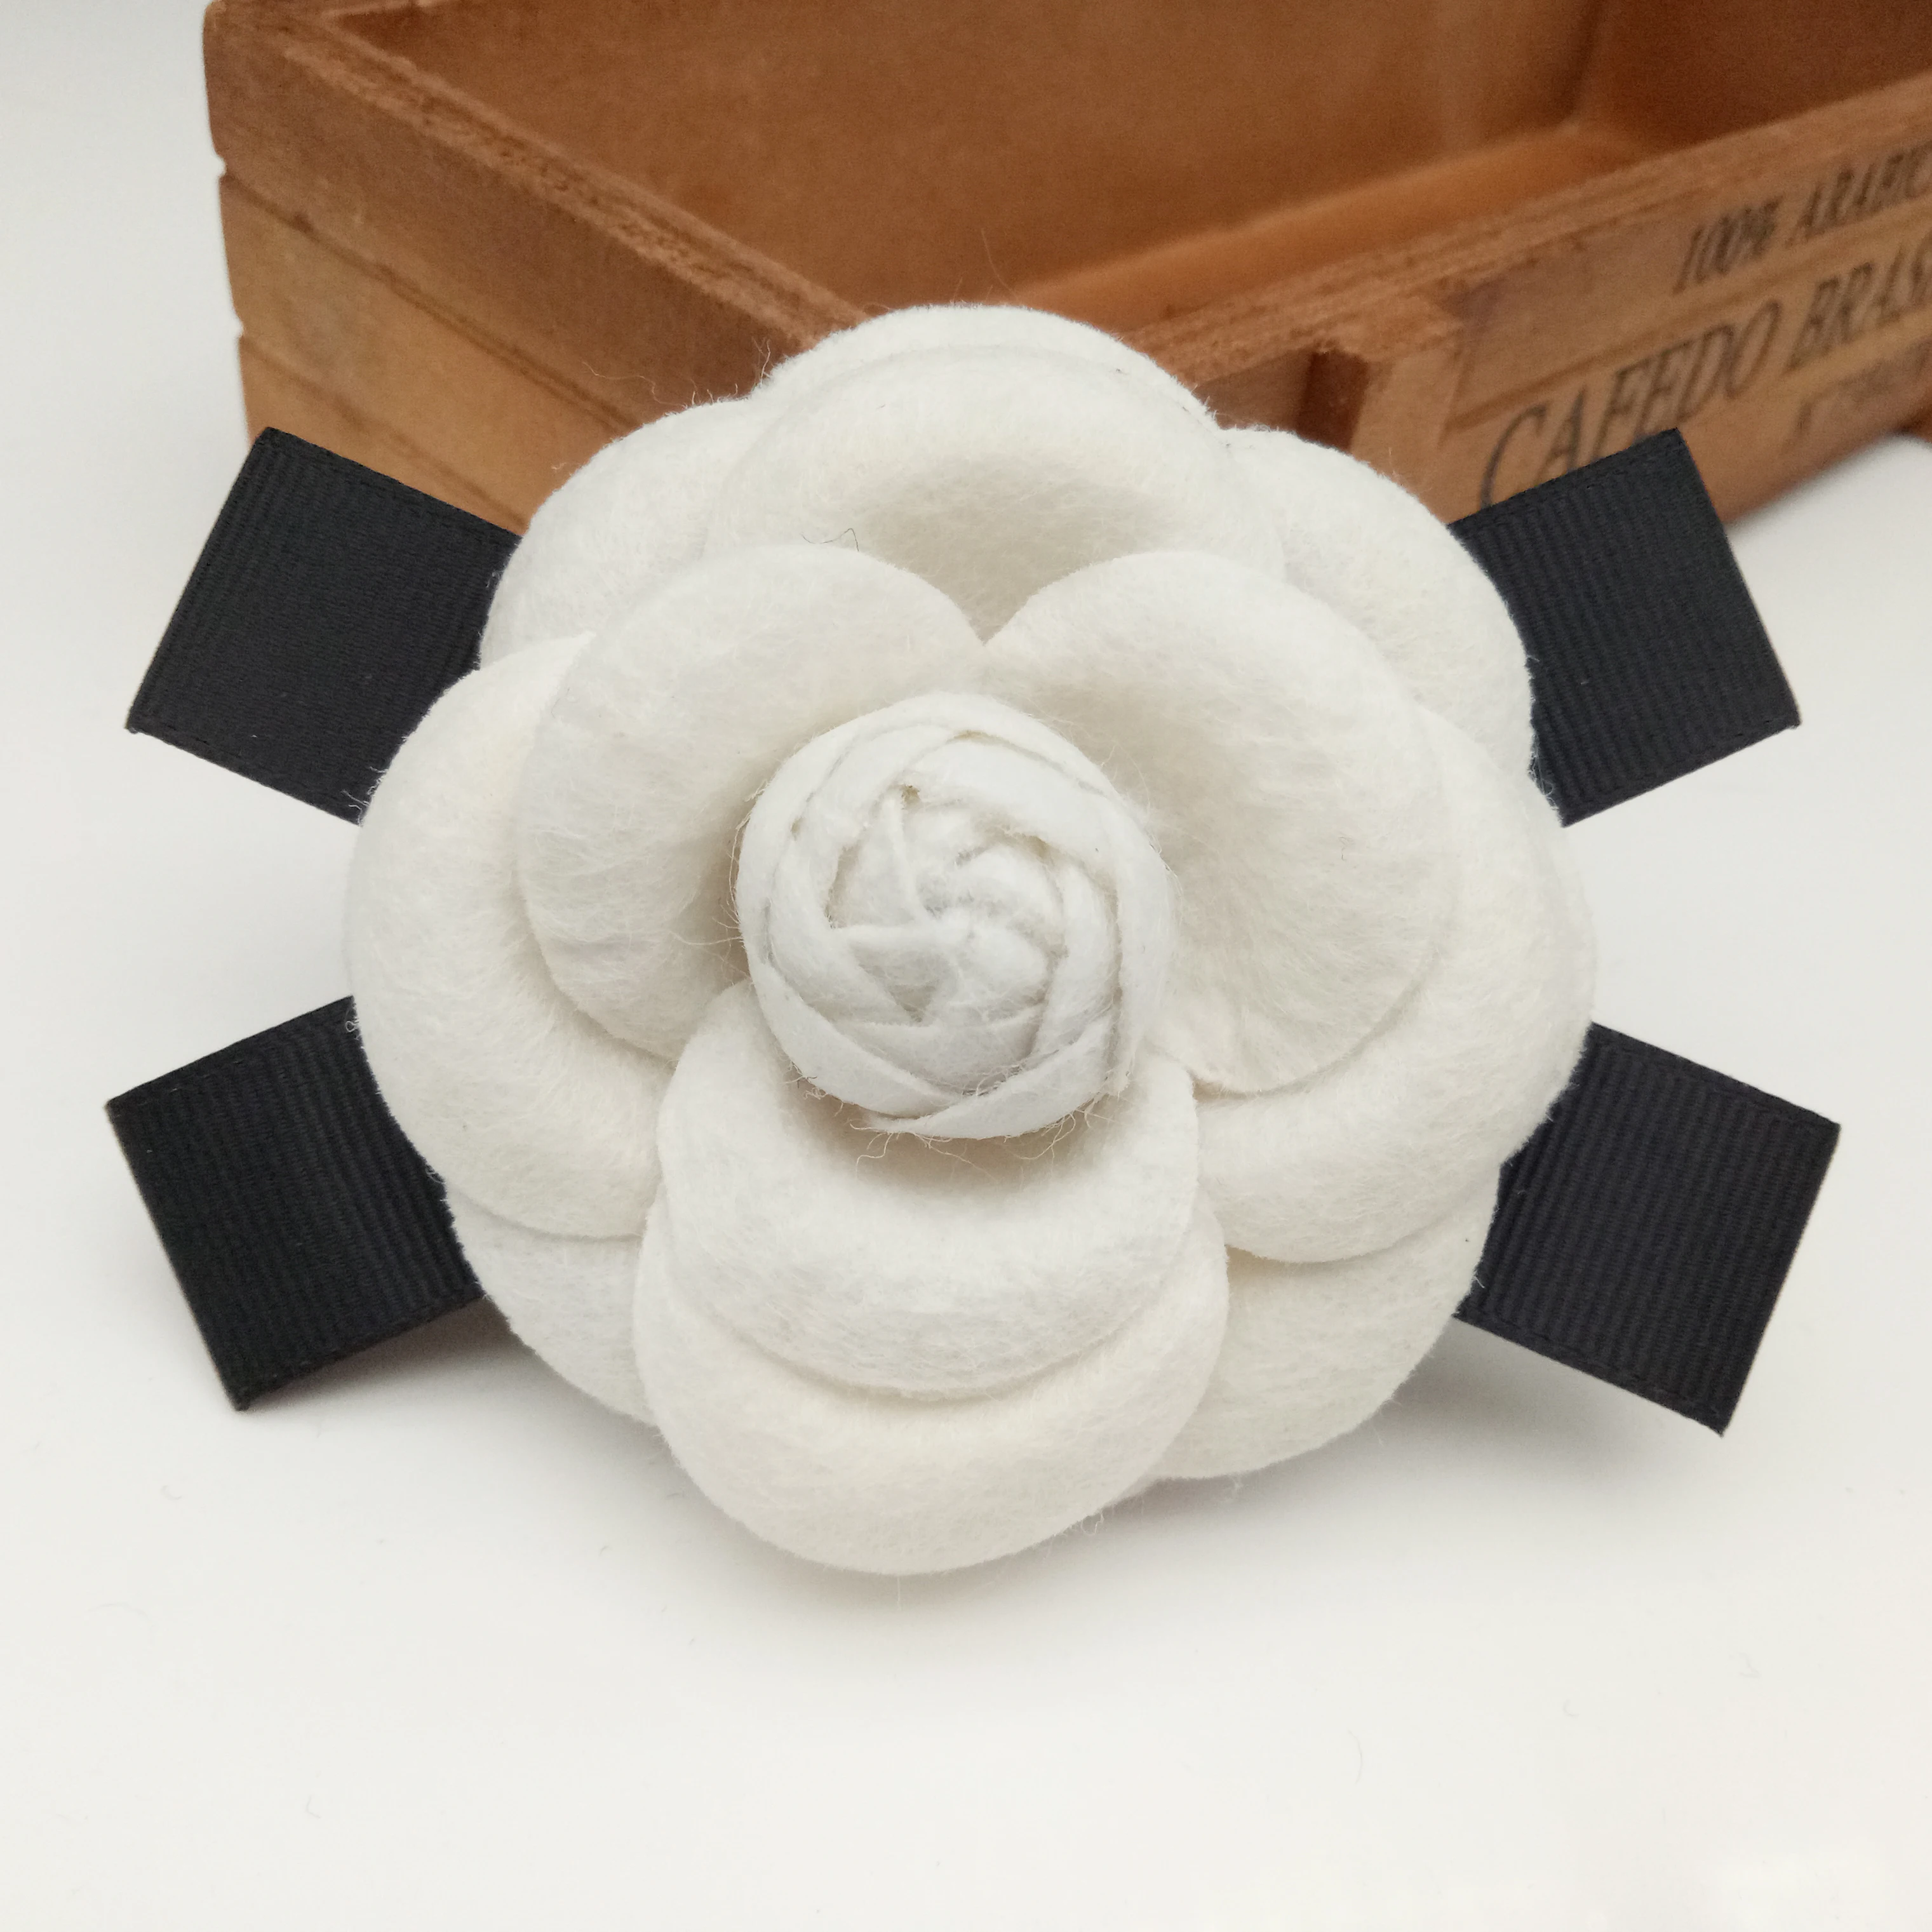 Fashion Female Fabric Camellia Flower Brooch for Wedding Big Handmade Bow Black White Cloth Brooches for Women Costume Jewelry